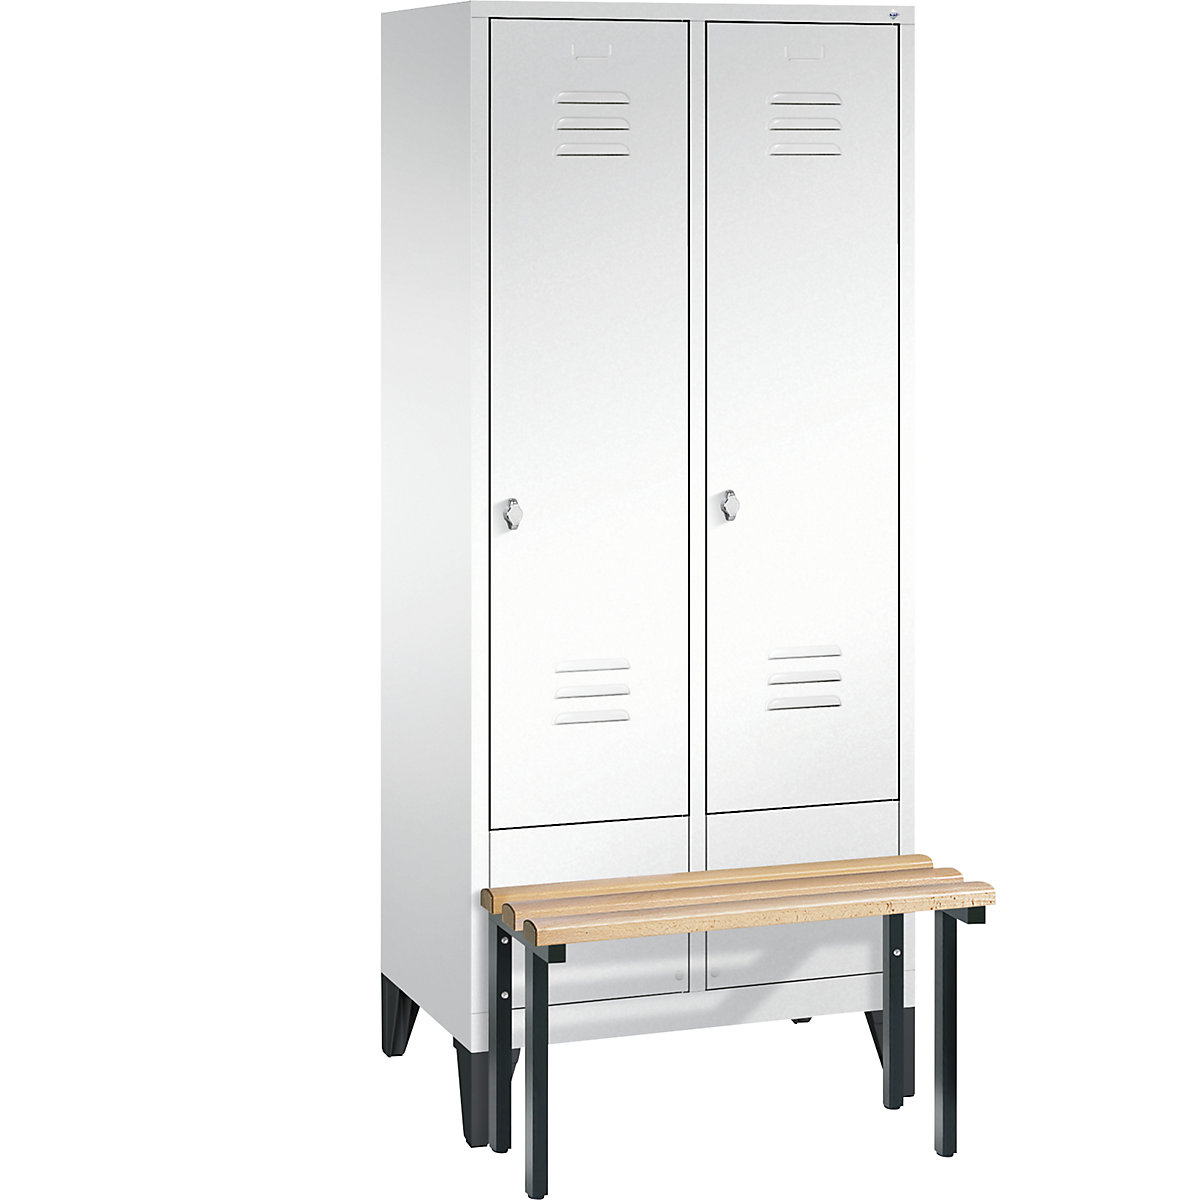 CLASSIC cloakroom locker with bench mounted in front – C+P, 2 compartments, compartment width 400 mm, traffic white-9